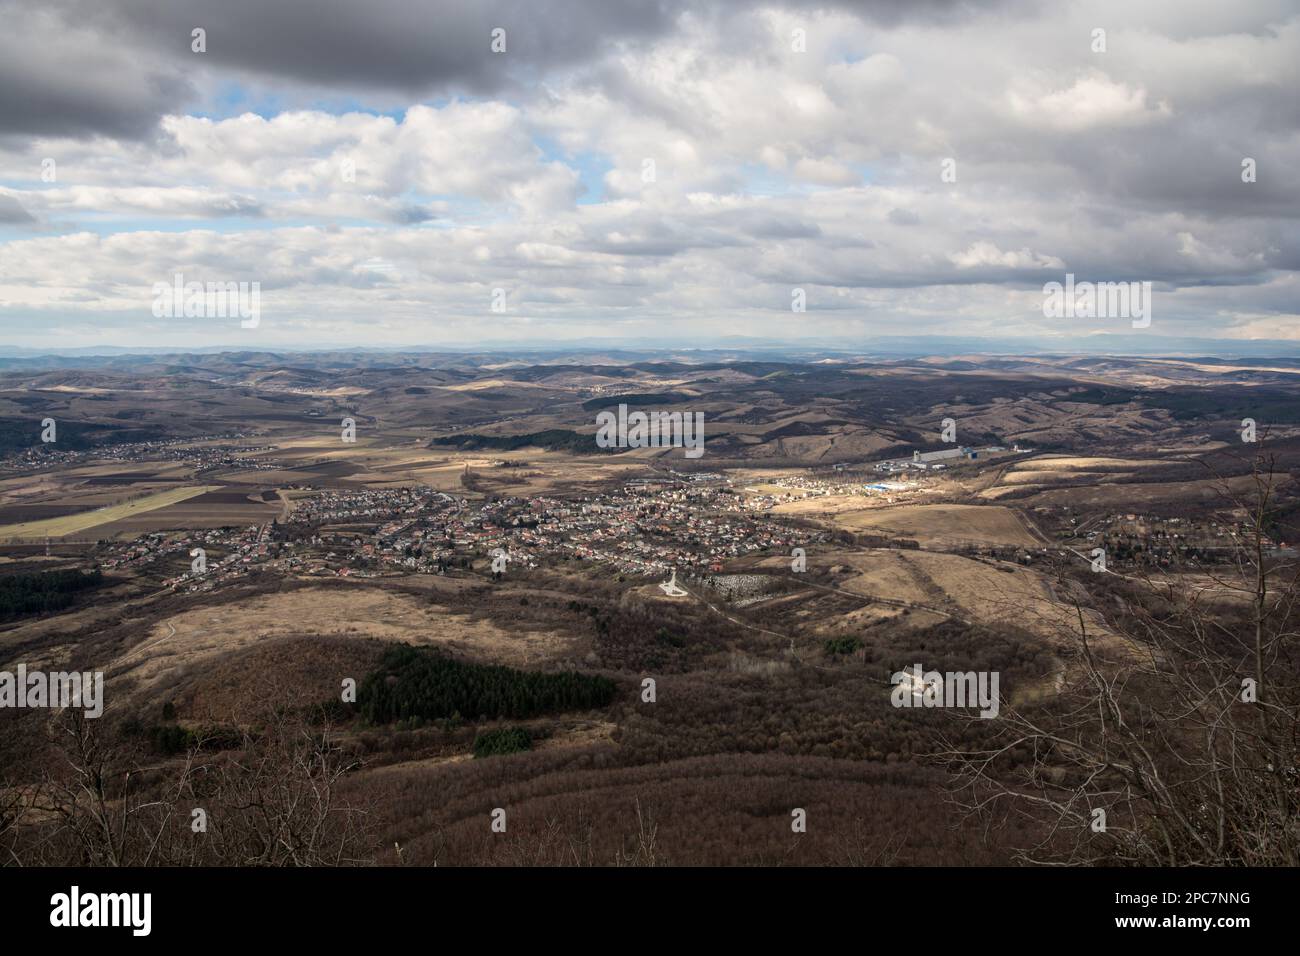 View from the top of the rocky mountain. Hungary, Bélapátfalva Stock Photo